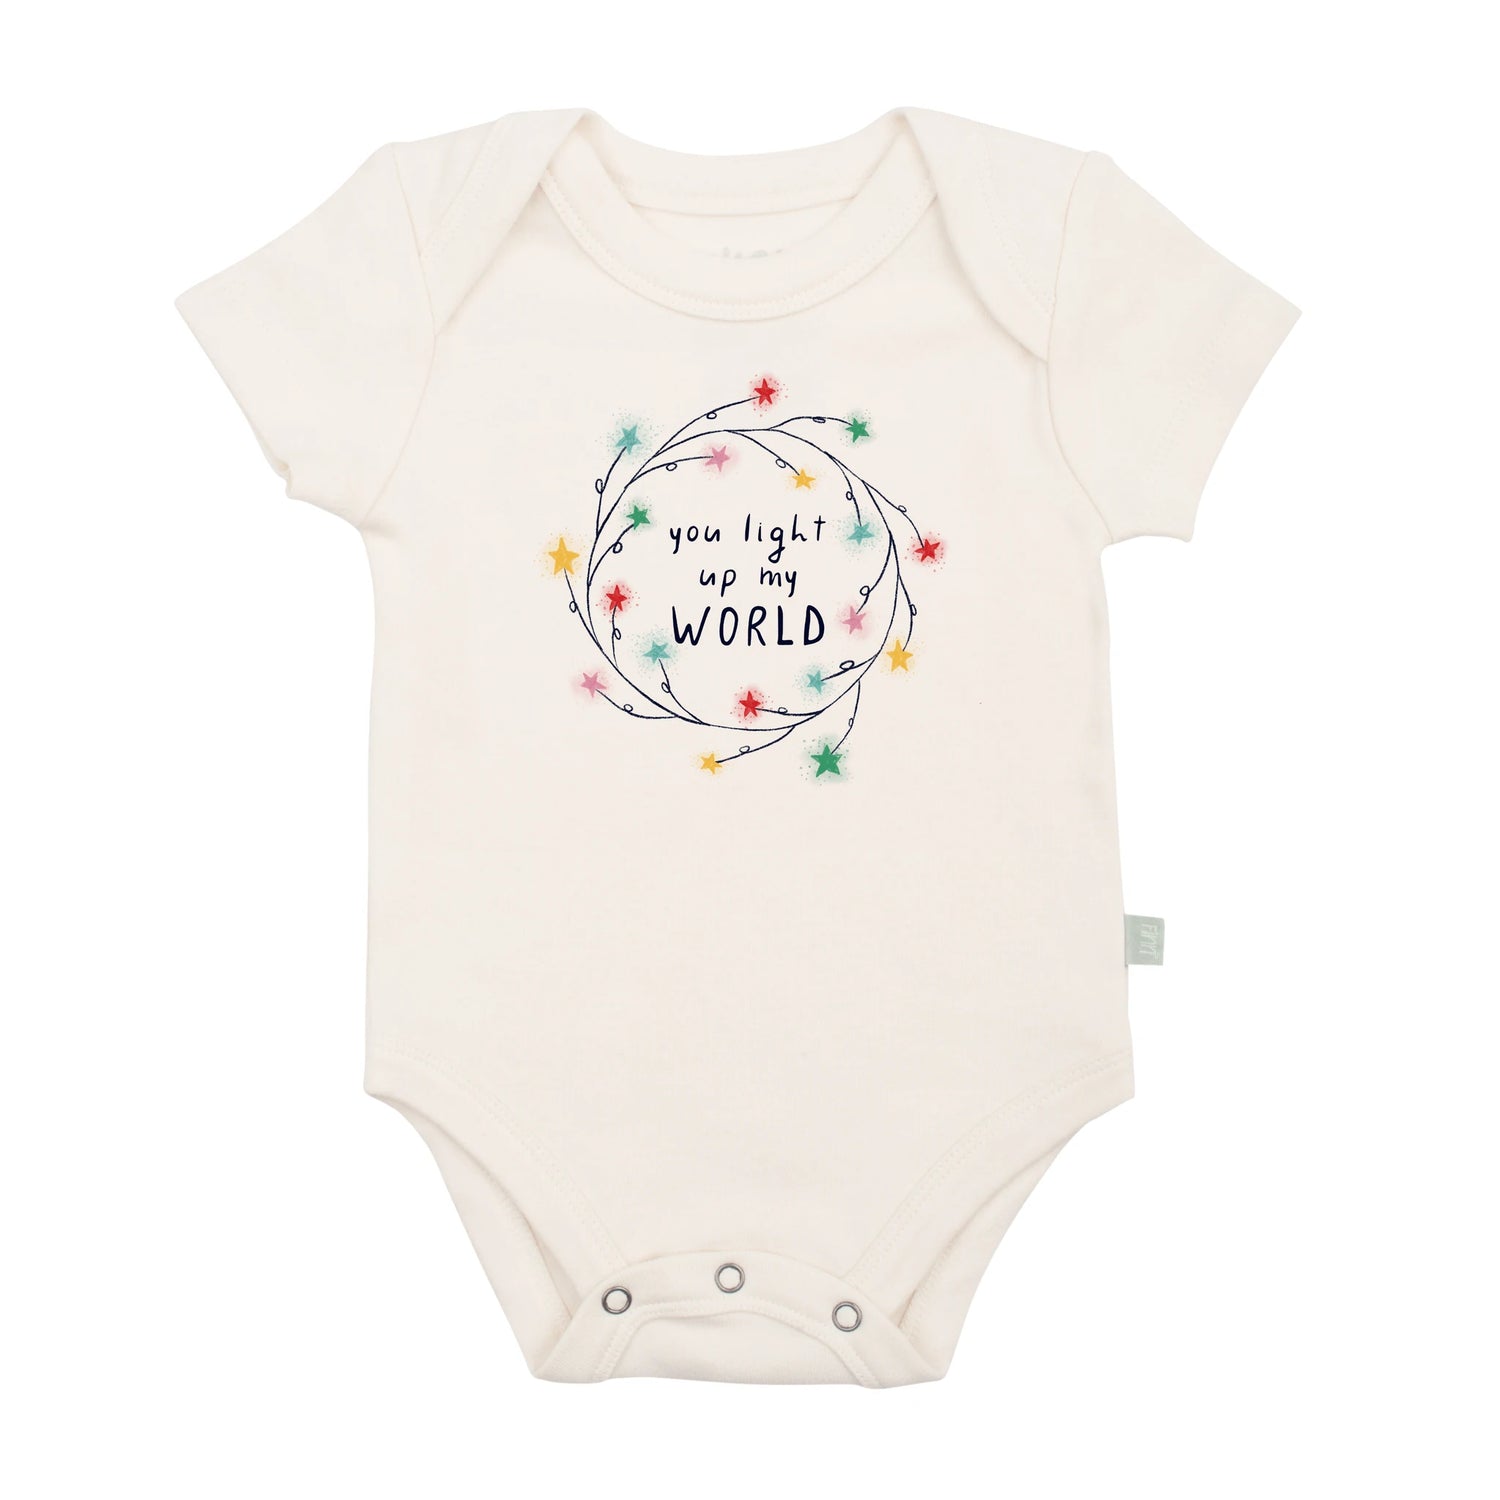 Finn+Emma's buttery-soft organic bodysuit features cheerful graphics printed with non-toxic dyes and comes with easy-snap fasteners for convenient diaper changes.